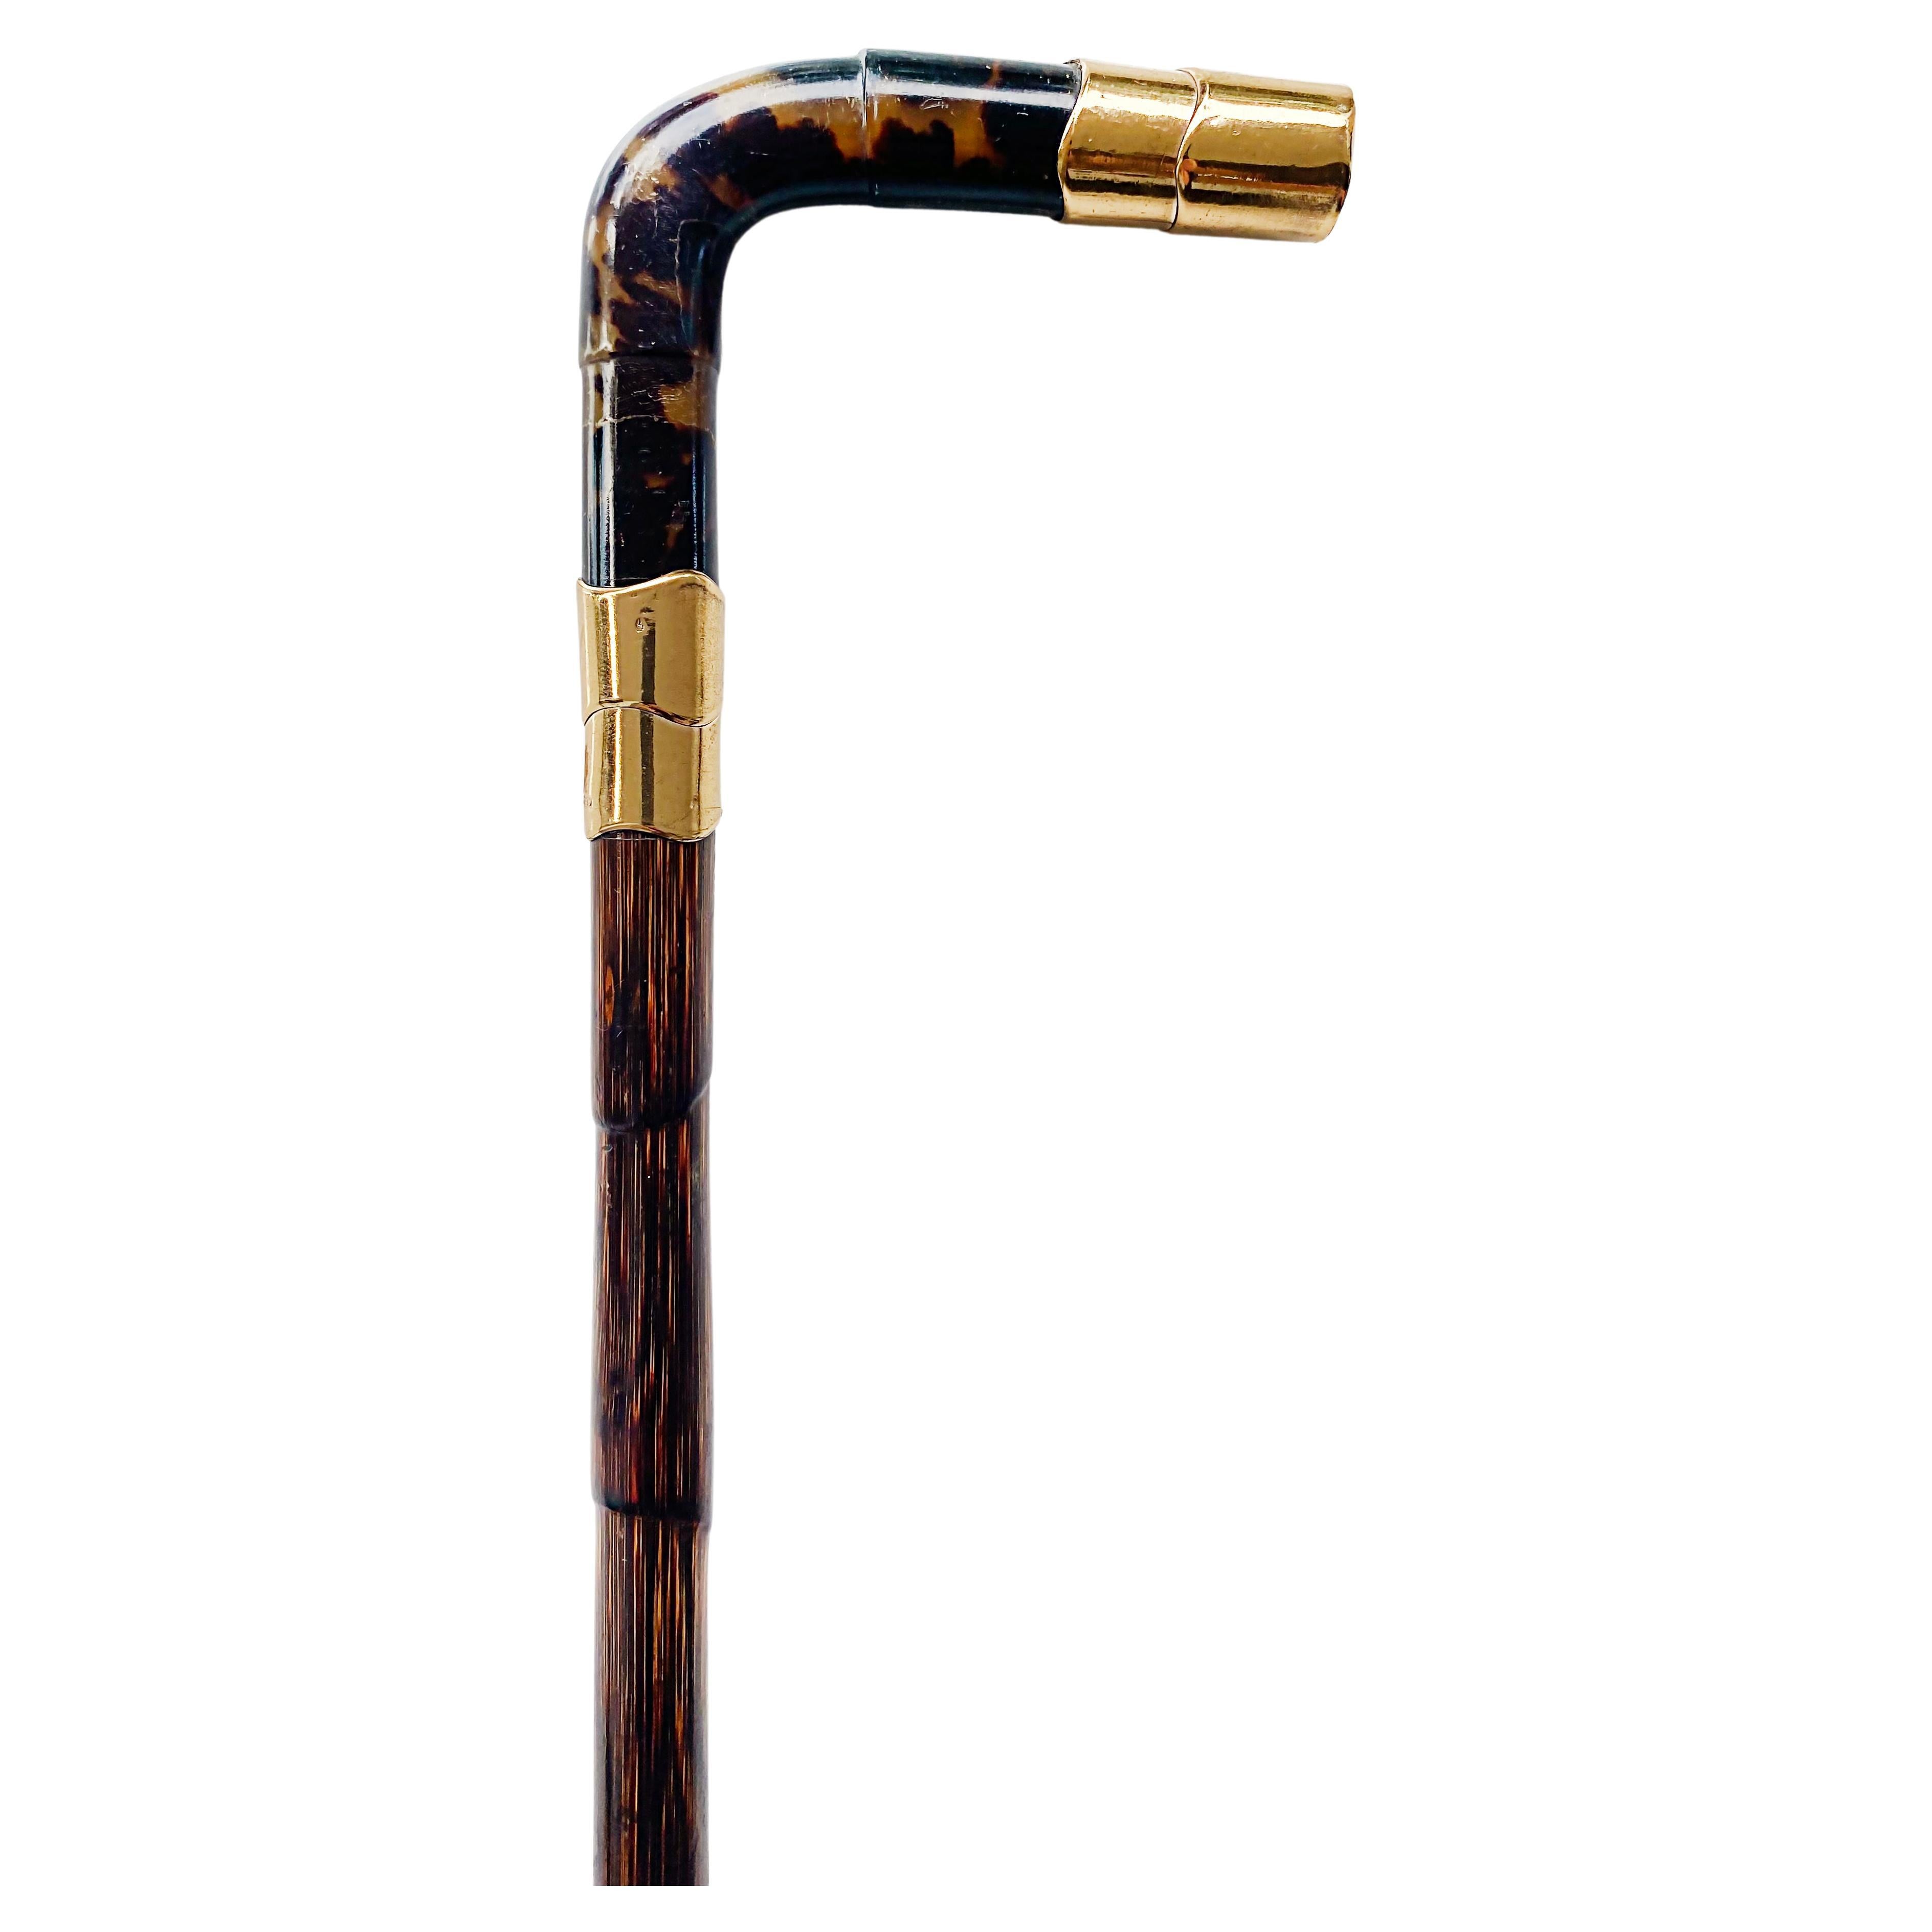 20th Century Gold Plated Rattan Walking Stick, Shell Handle and Bamboo Stick